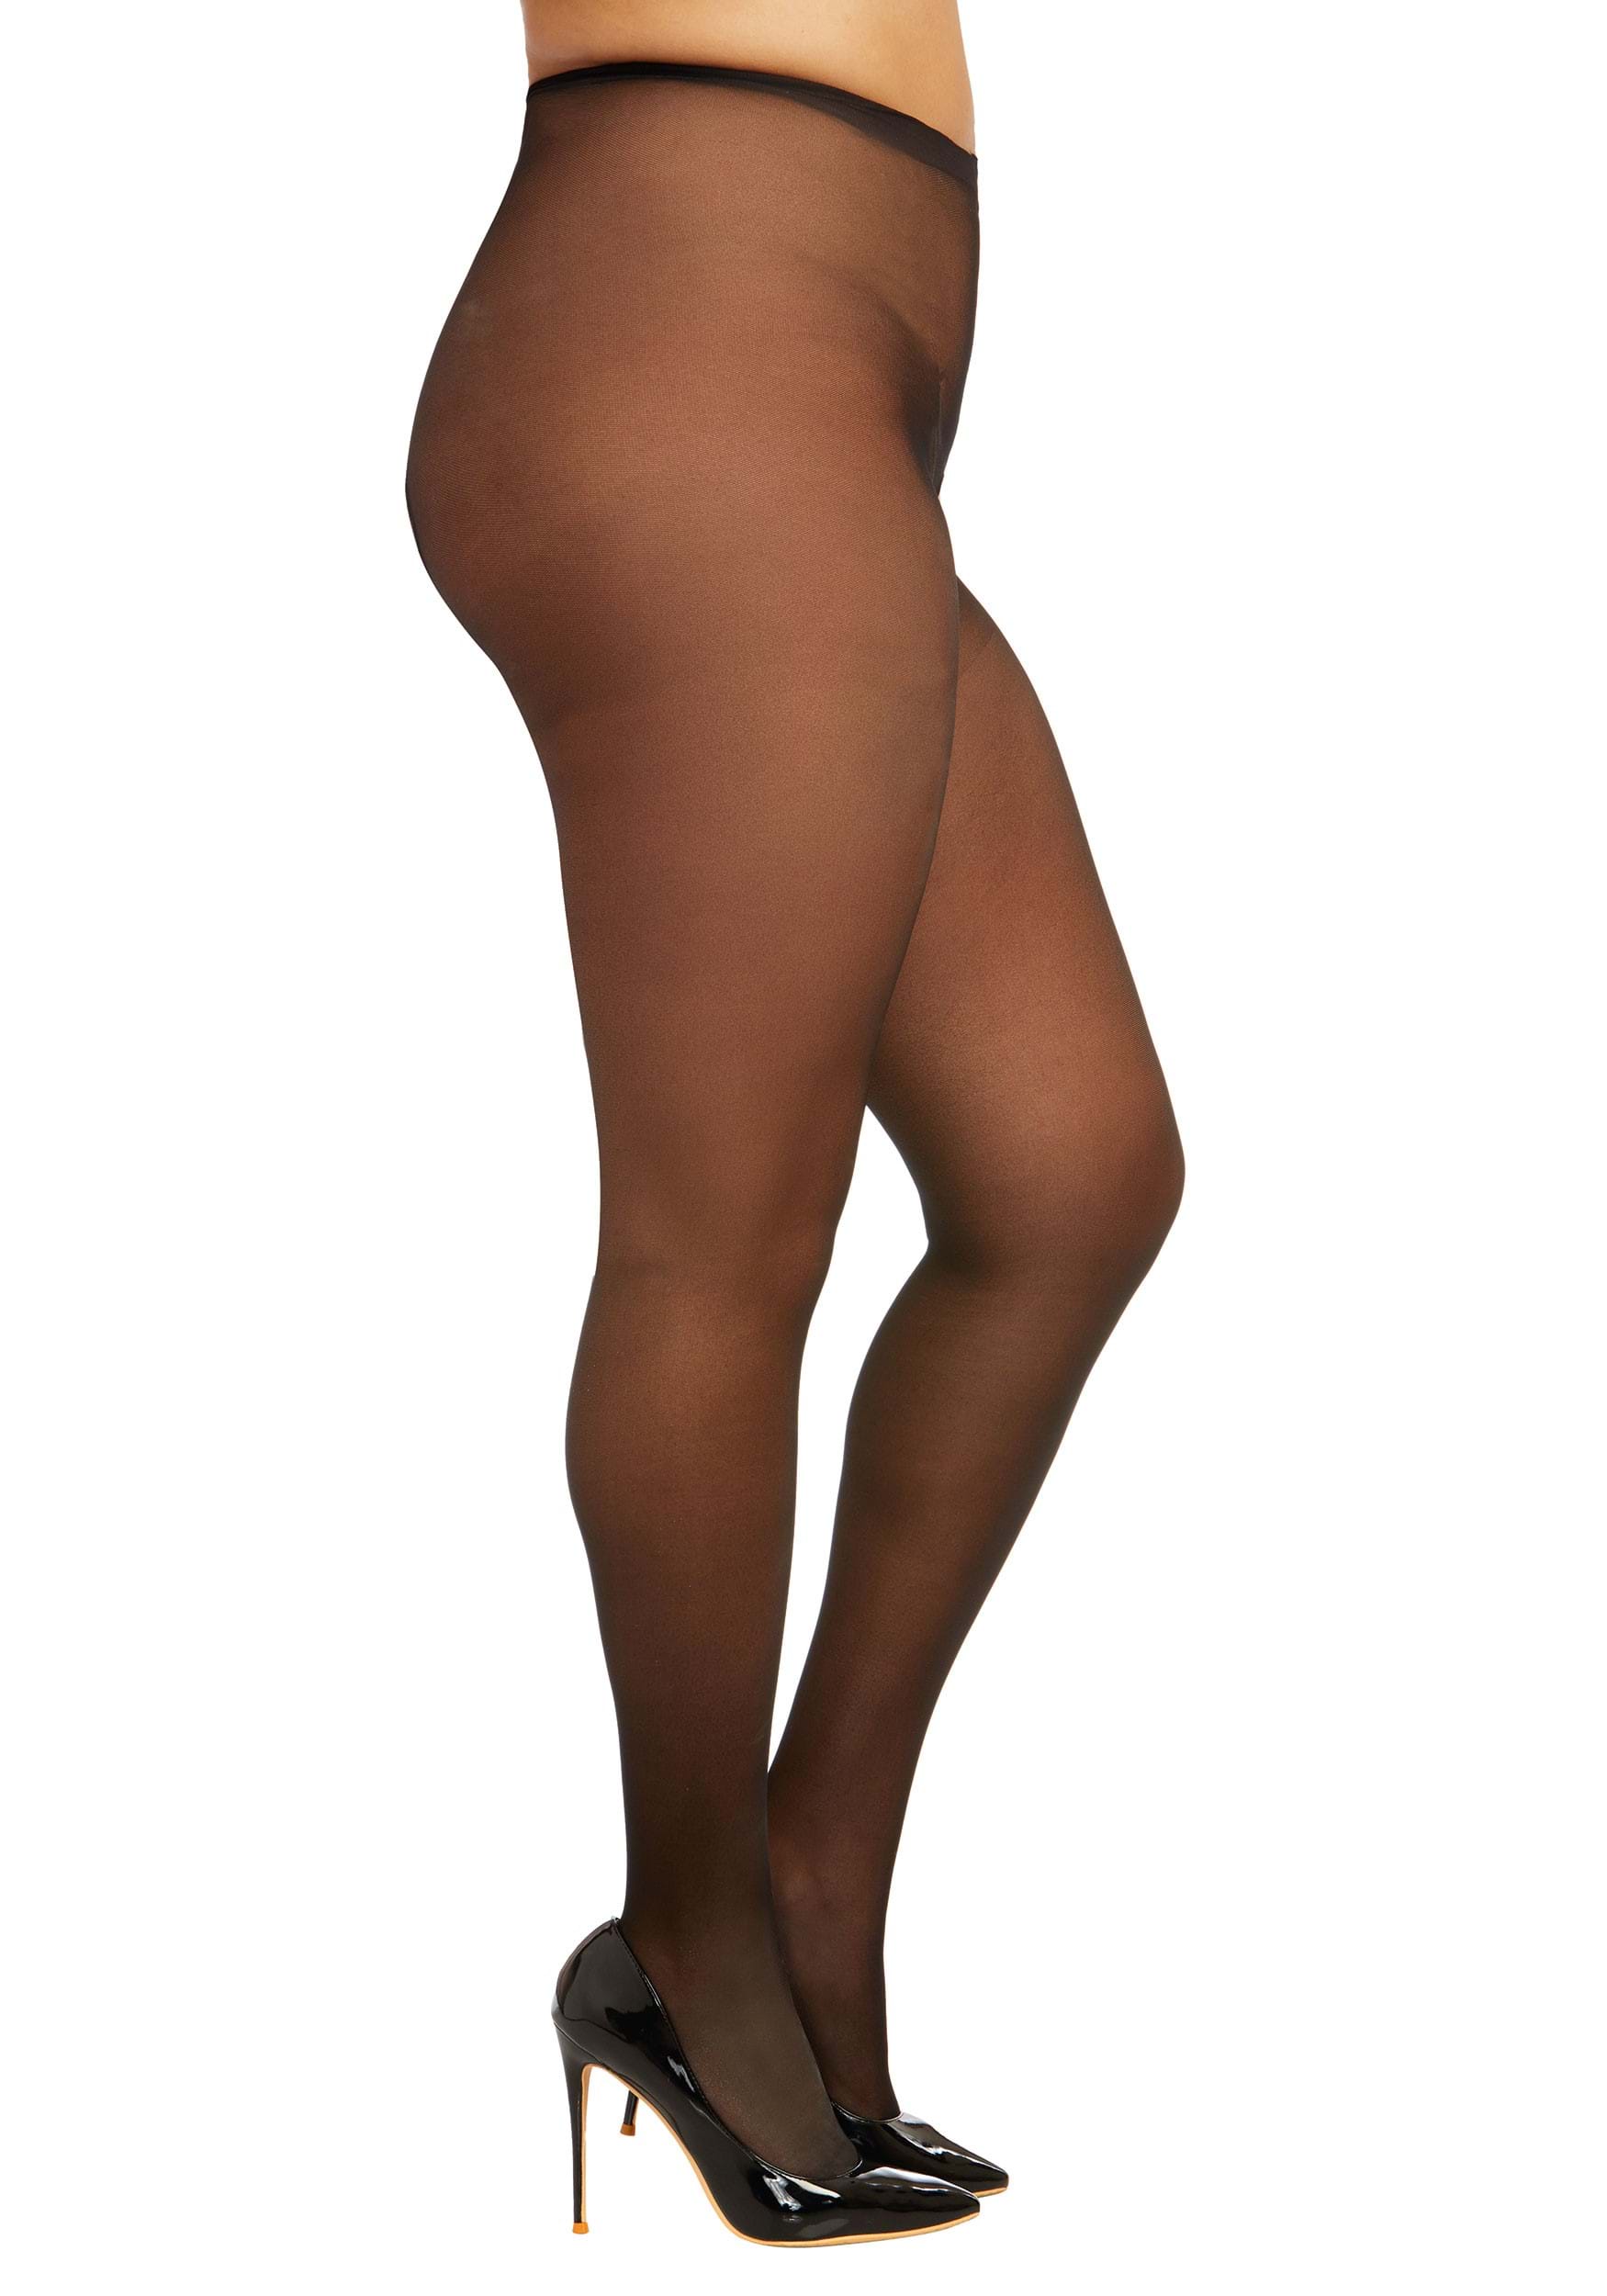 https://images.halloweencostumes.com/products/91585/1-1/womens-plus-size-black-open-crotch-pantyhose.jpg